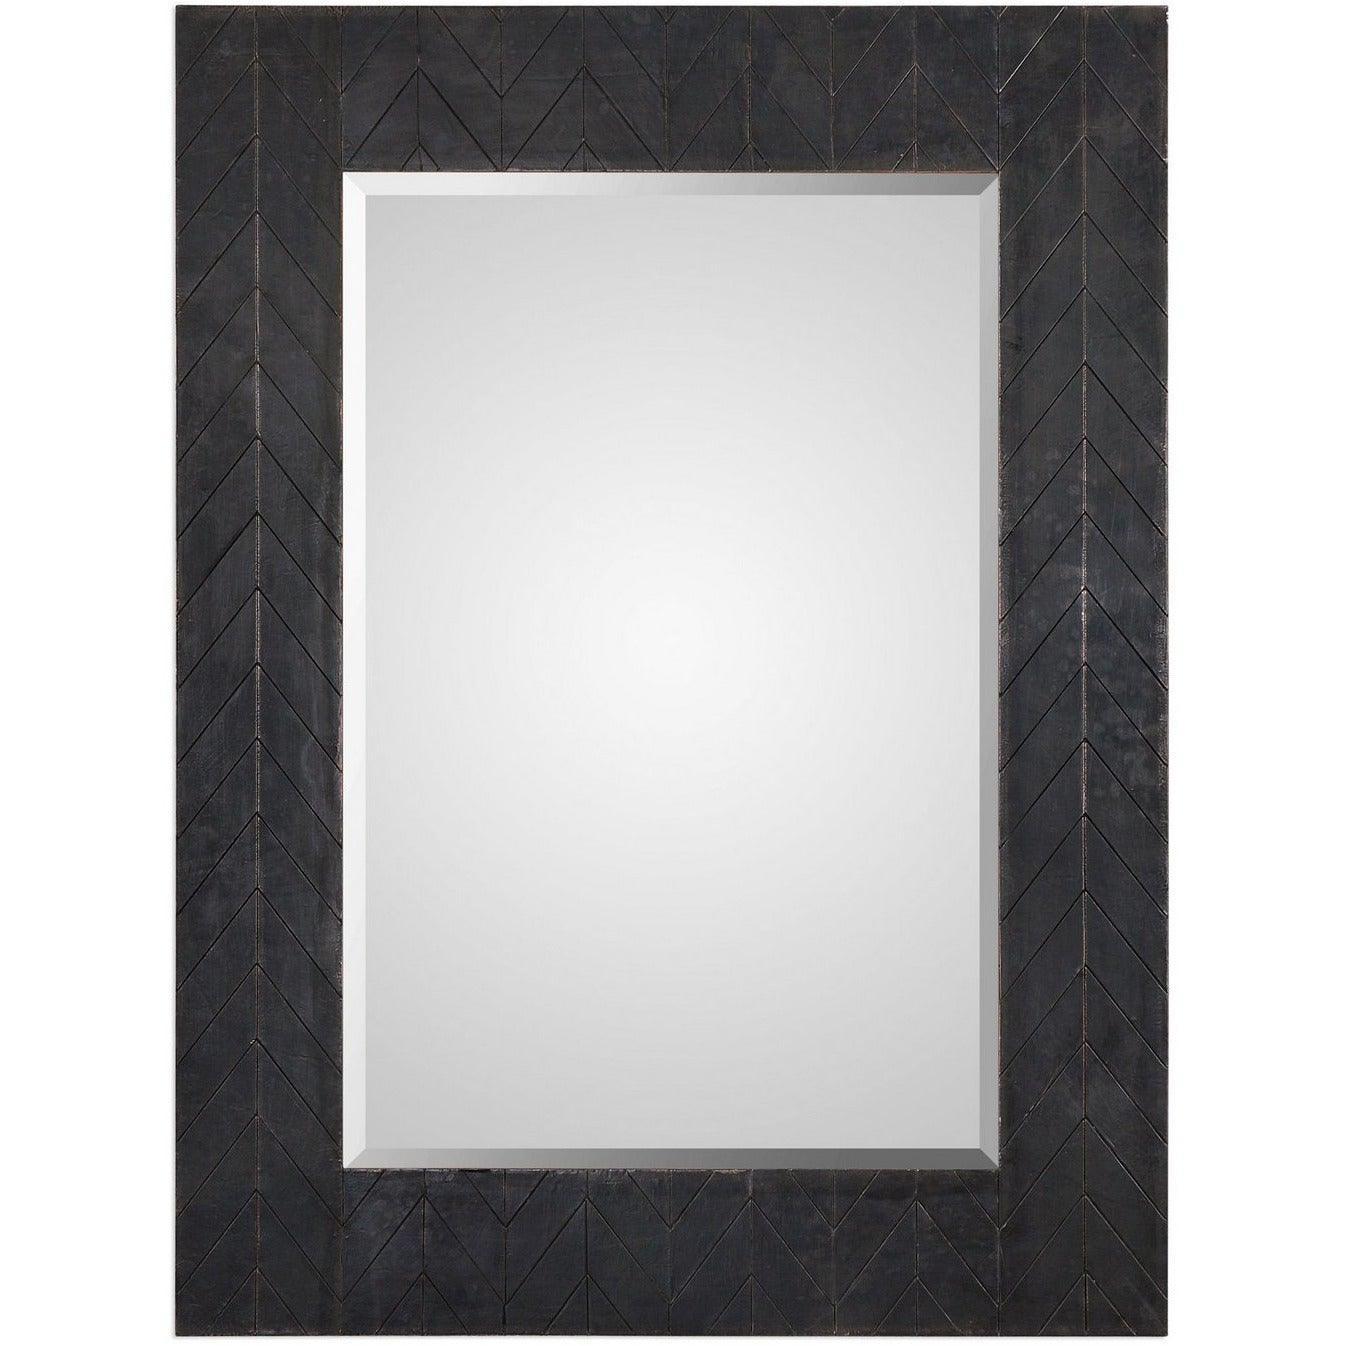 The Uttermost - Caprione Mirror - 09294 | Montreal Lighting & Hardware